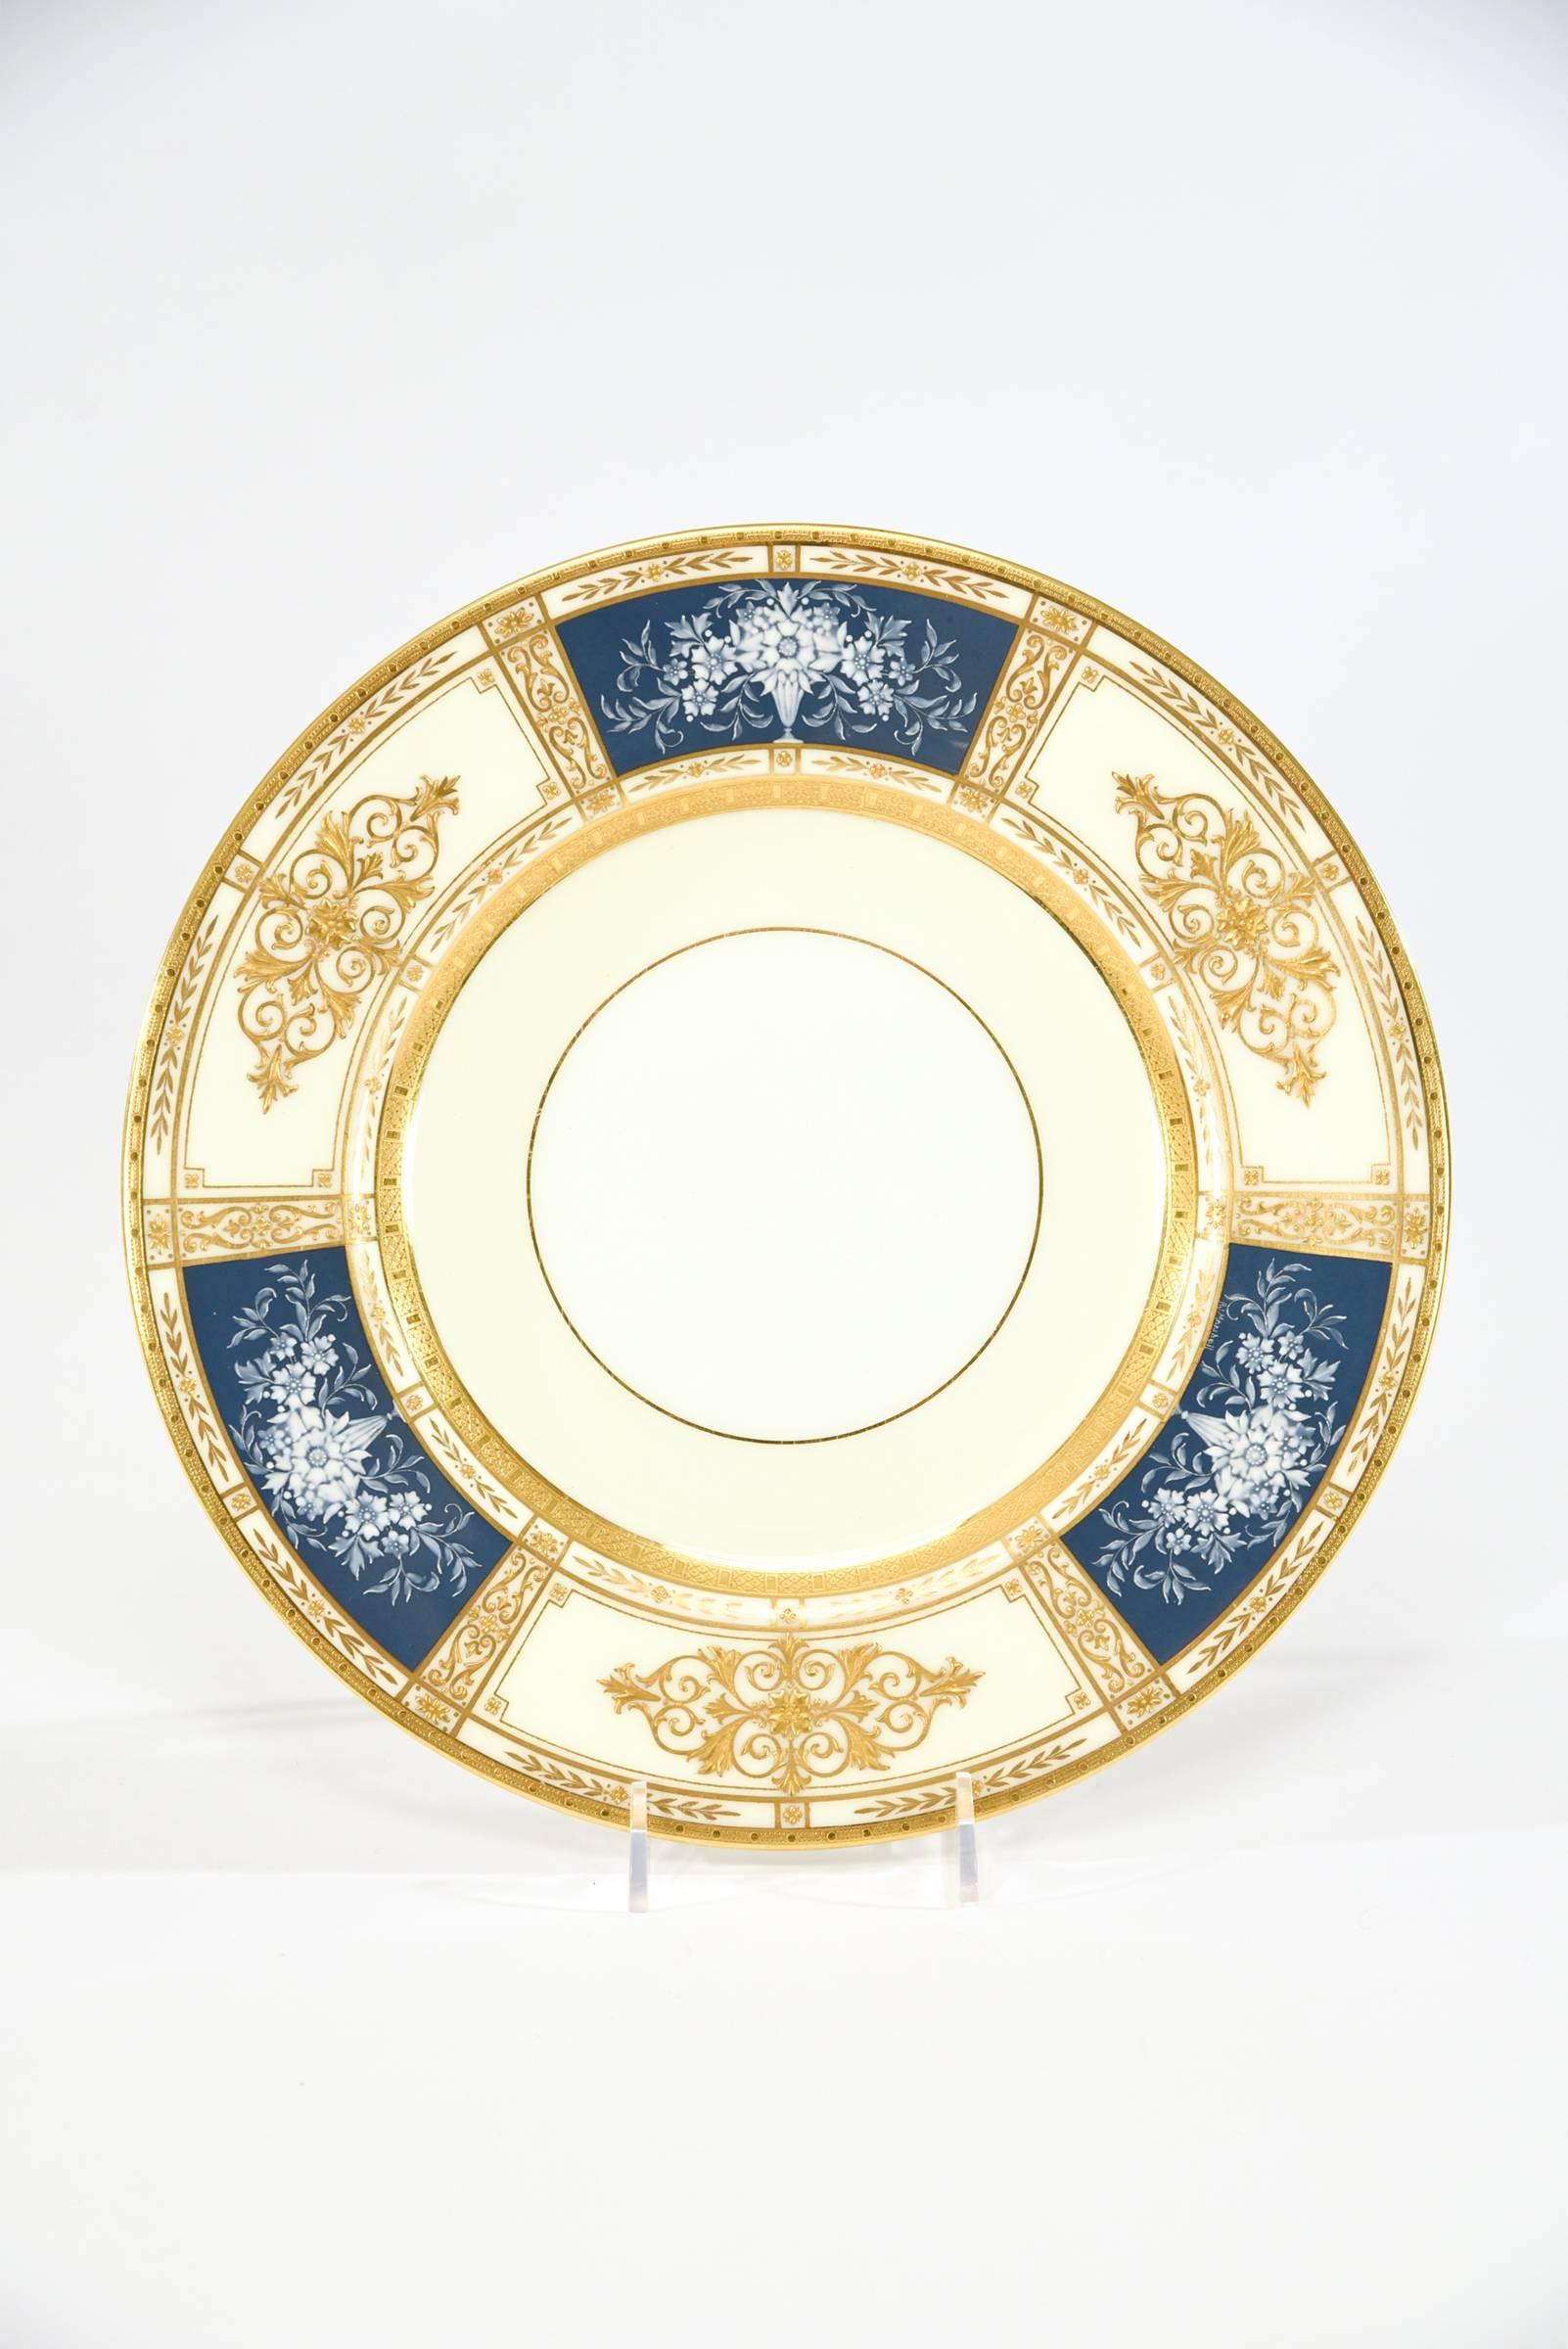 Neoclassical 12 Minton French Enamel Pate Sur Pate Artist Signed Marshall Dinner Plates For Sale